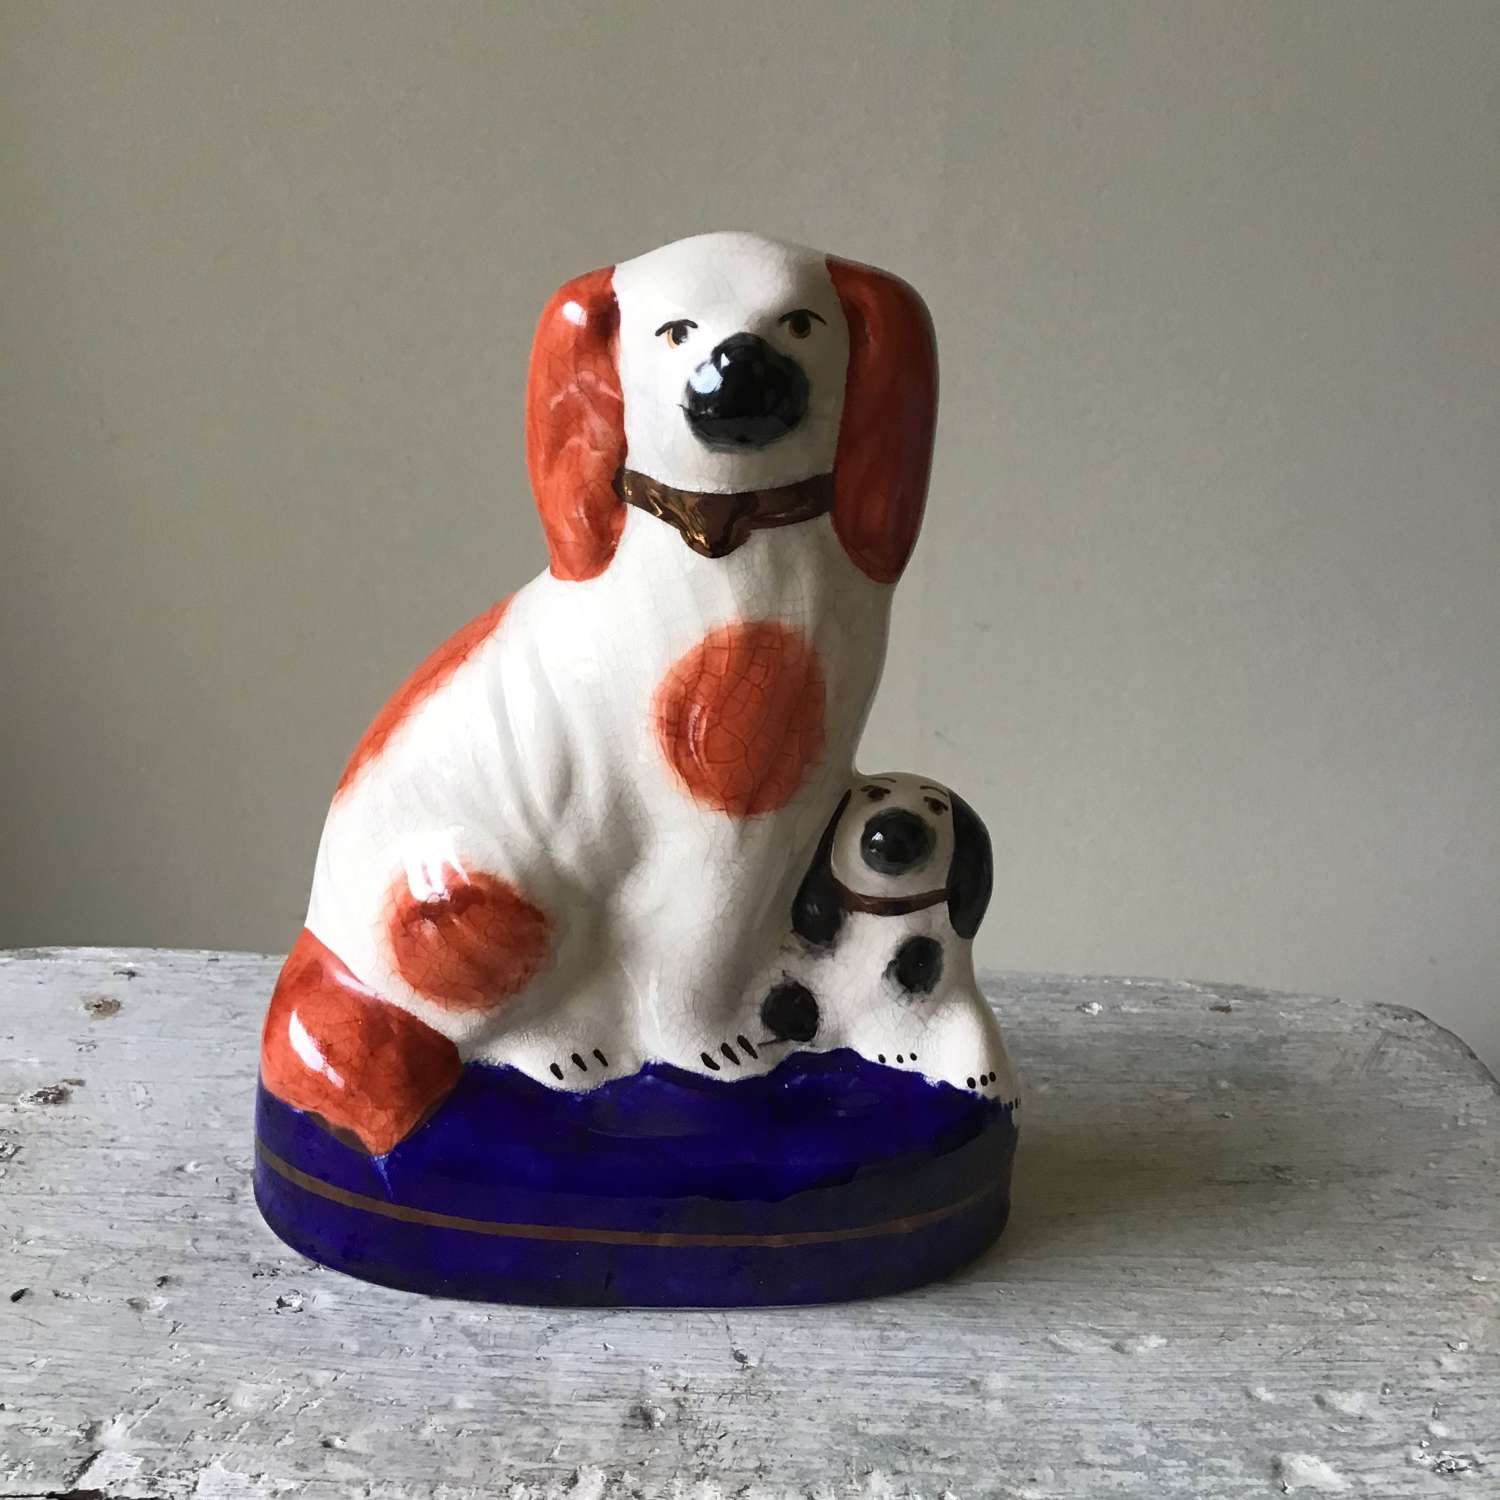 Vintage style Staffordshire dog and puppy ornament